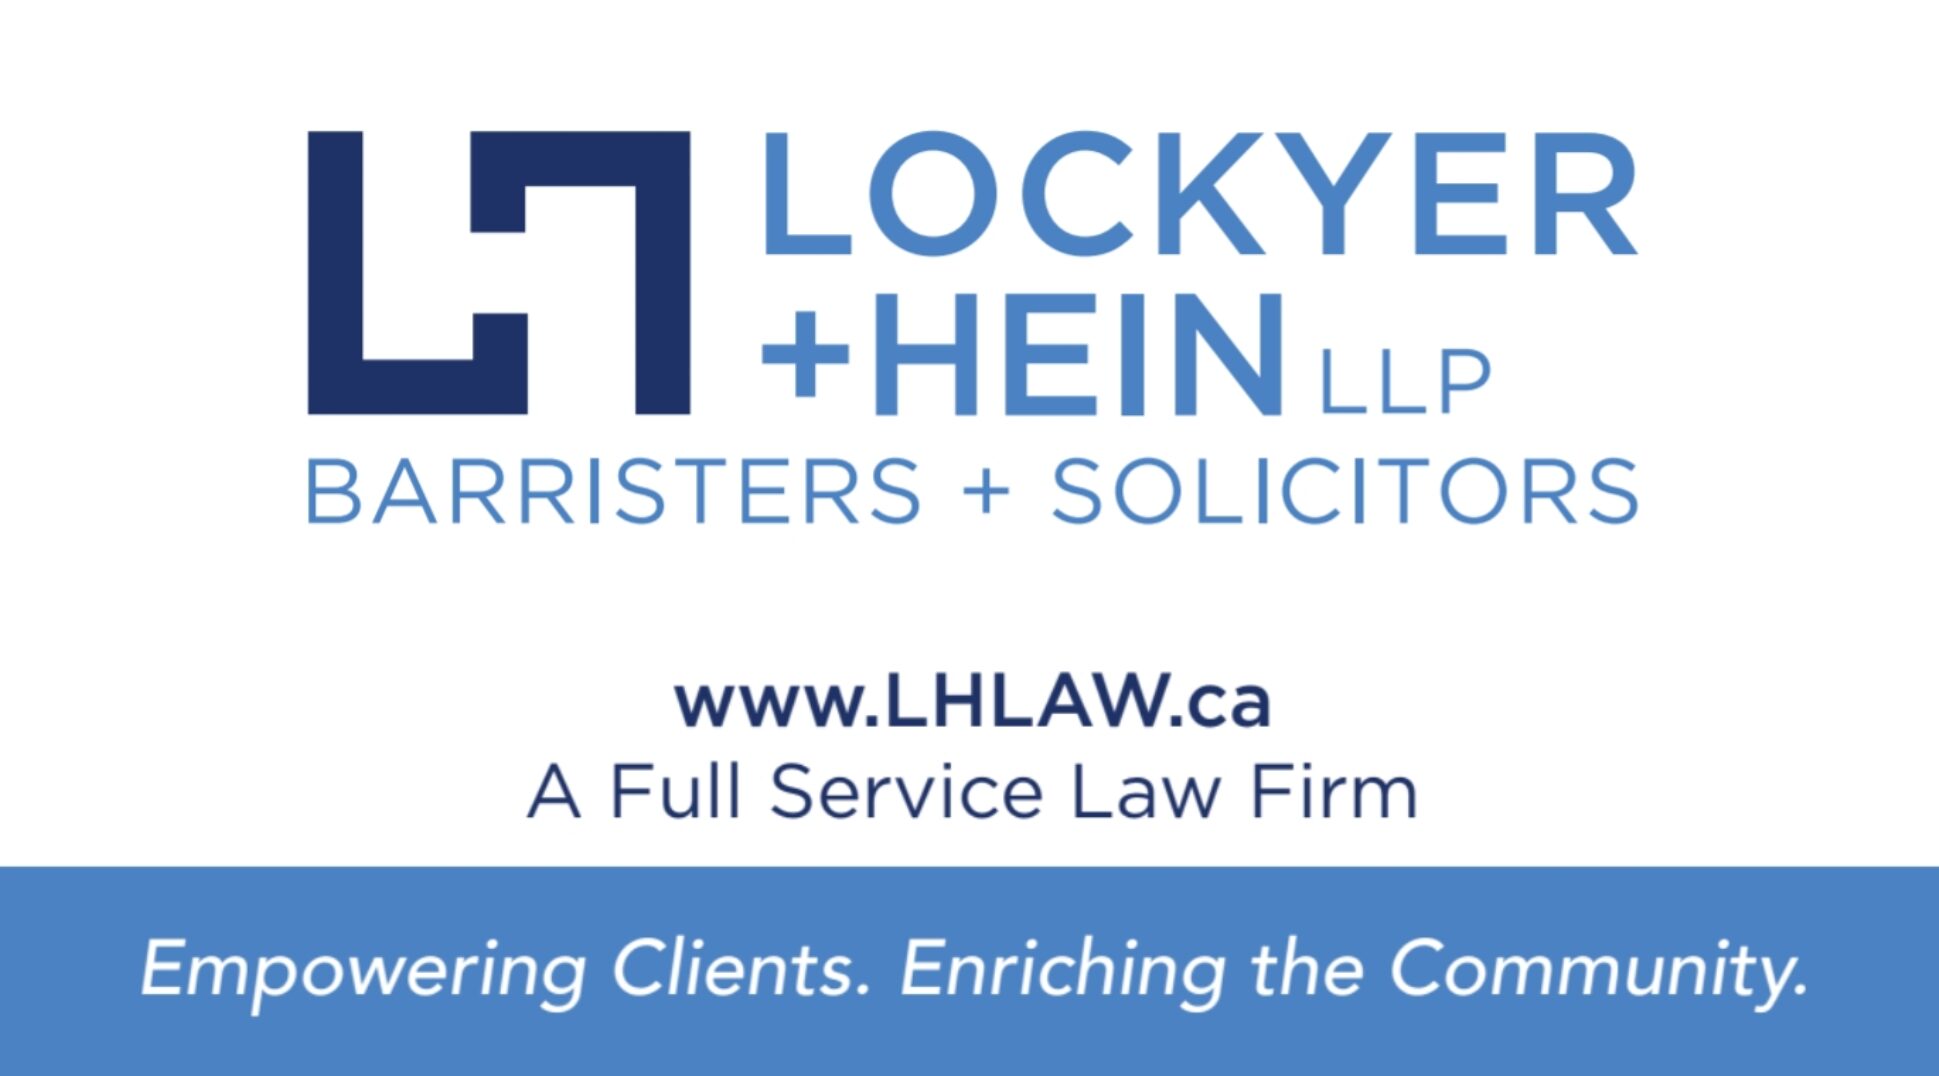 Lockyer + Hein LLP Barristers +Solicitors